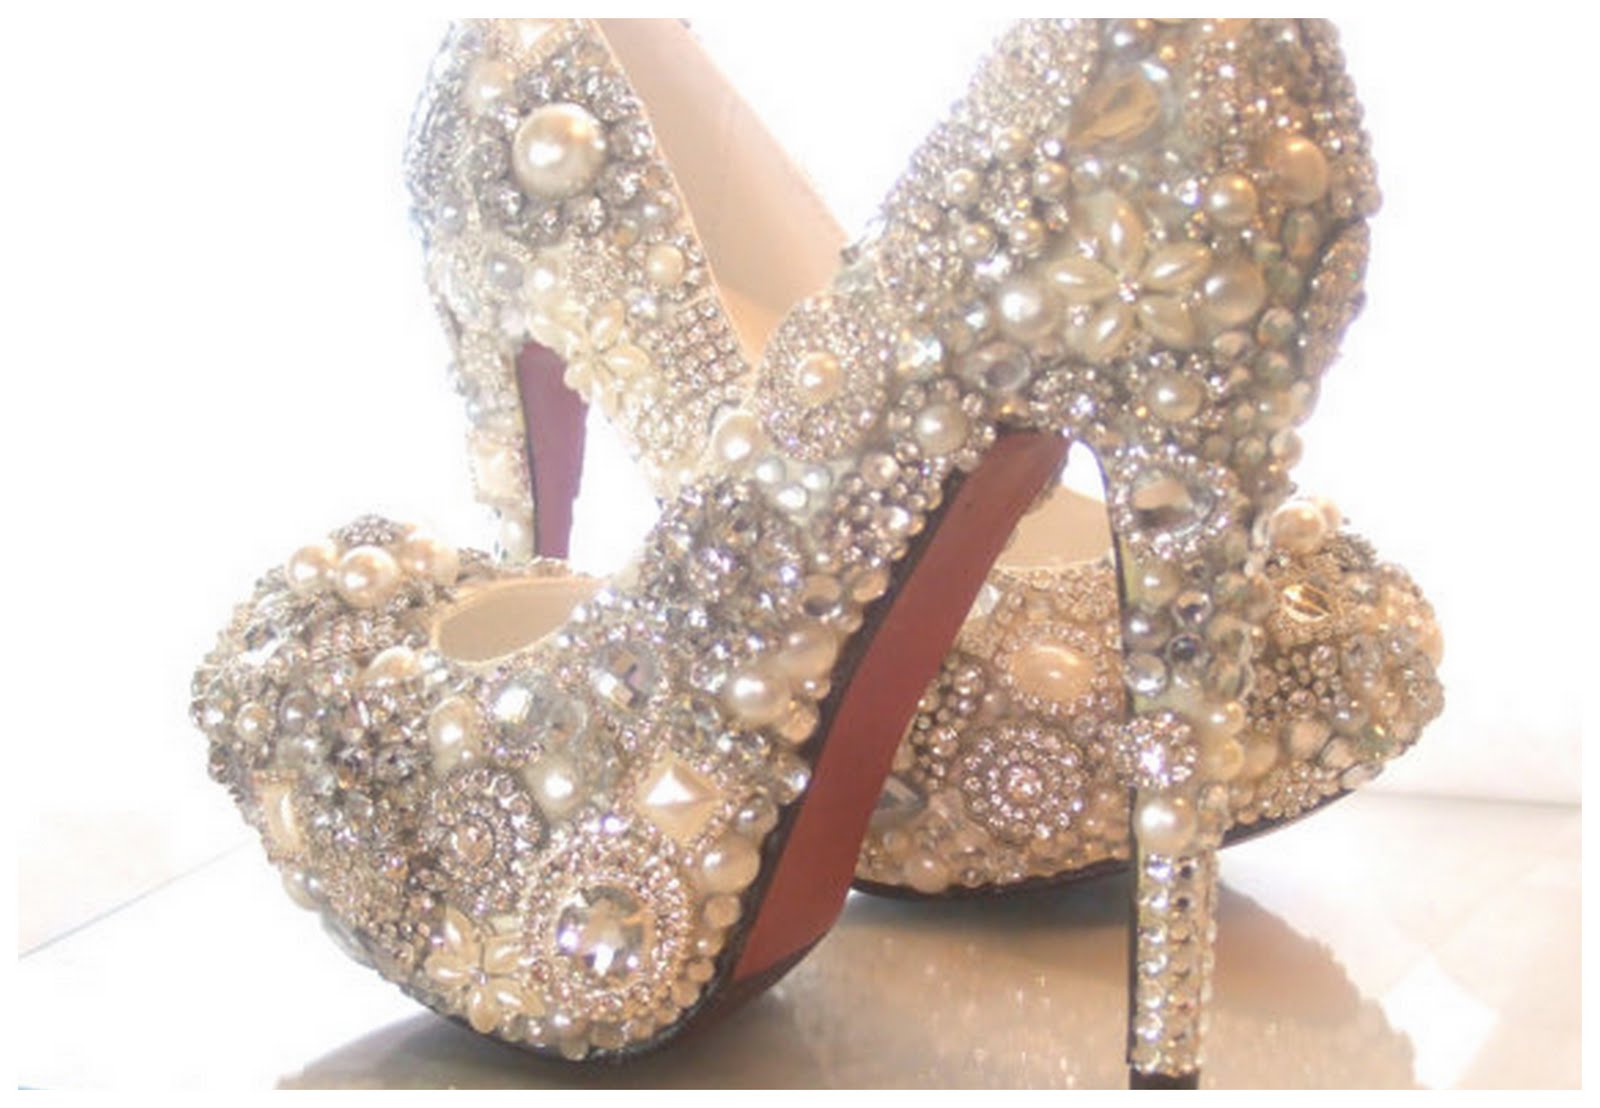 Beautiful Sparkly Shoes for your Wedding Day! Have your Dream Wedding